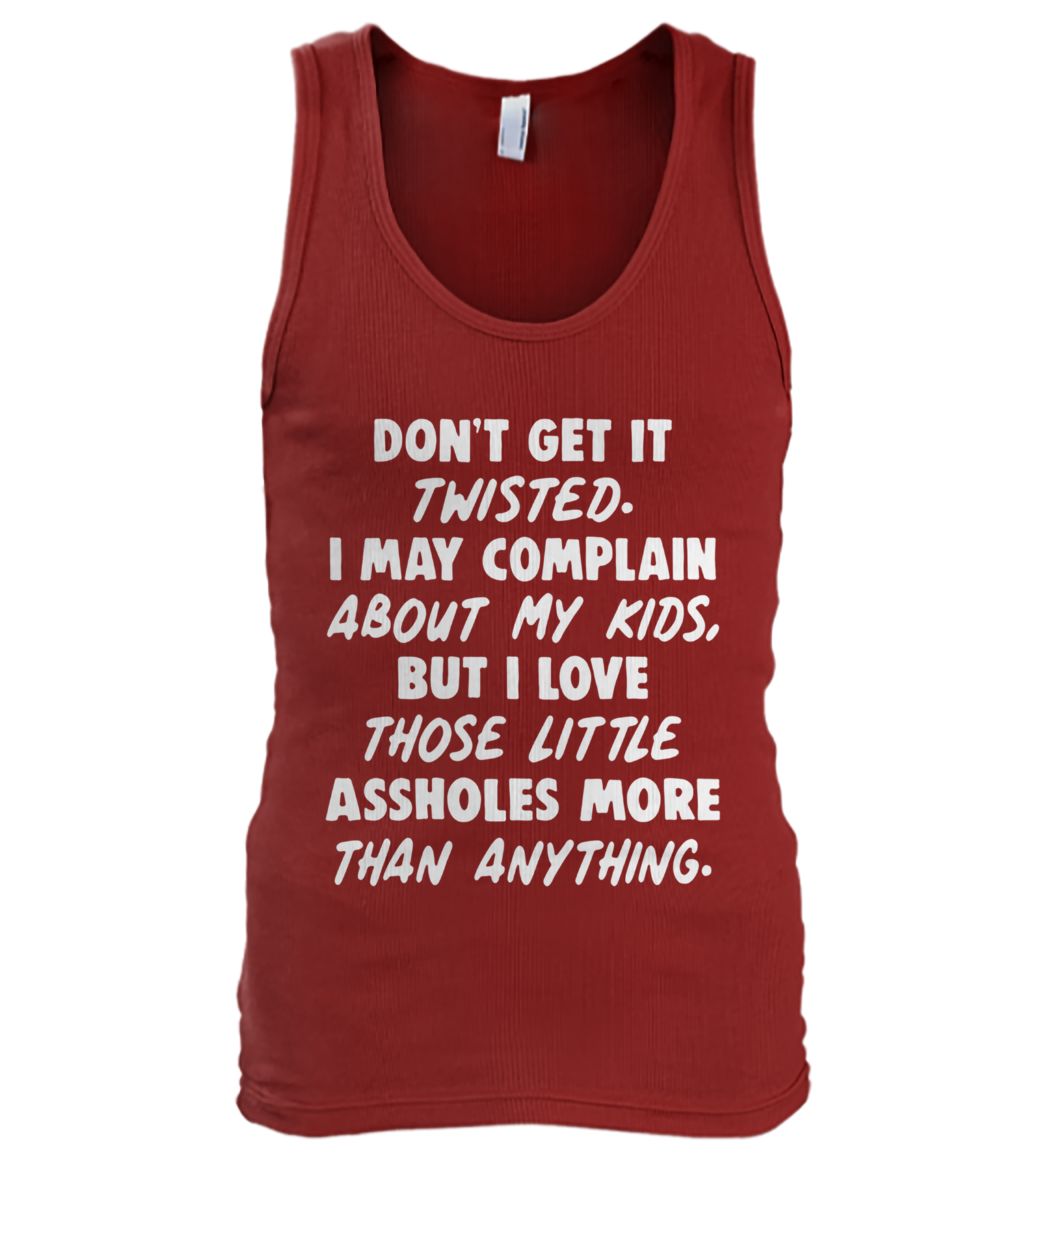 Don't get it twisted I may complain about my kids but I love those little assholes more than anything men's tank top